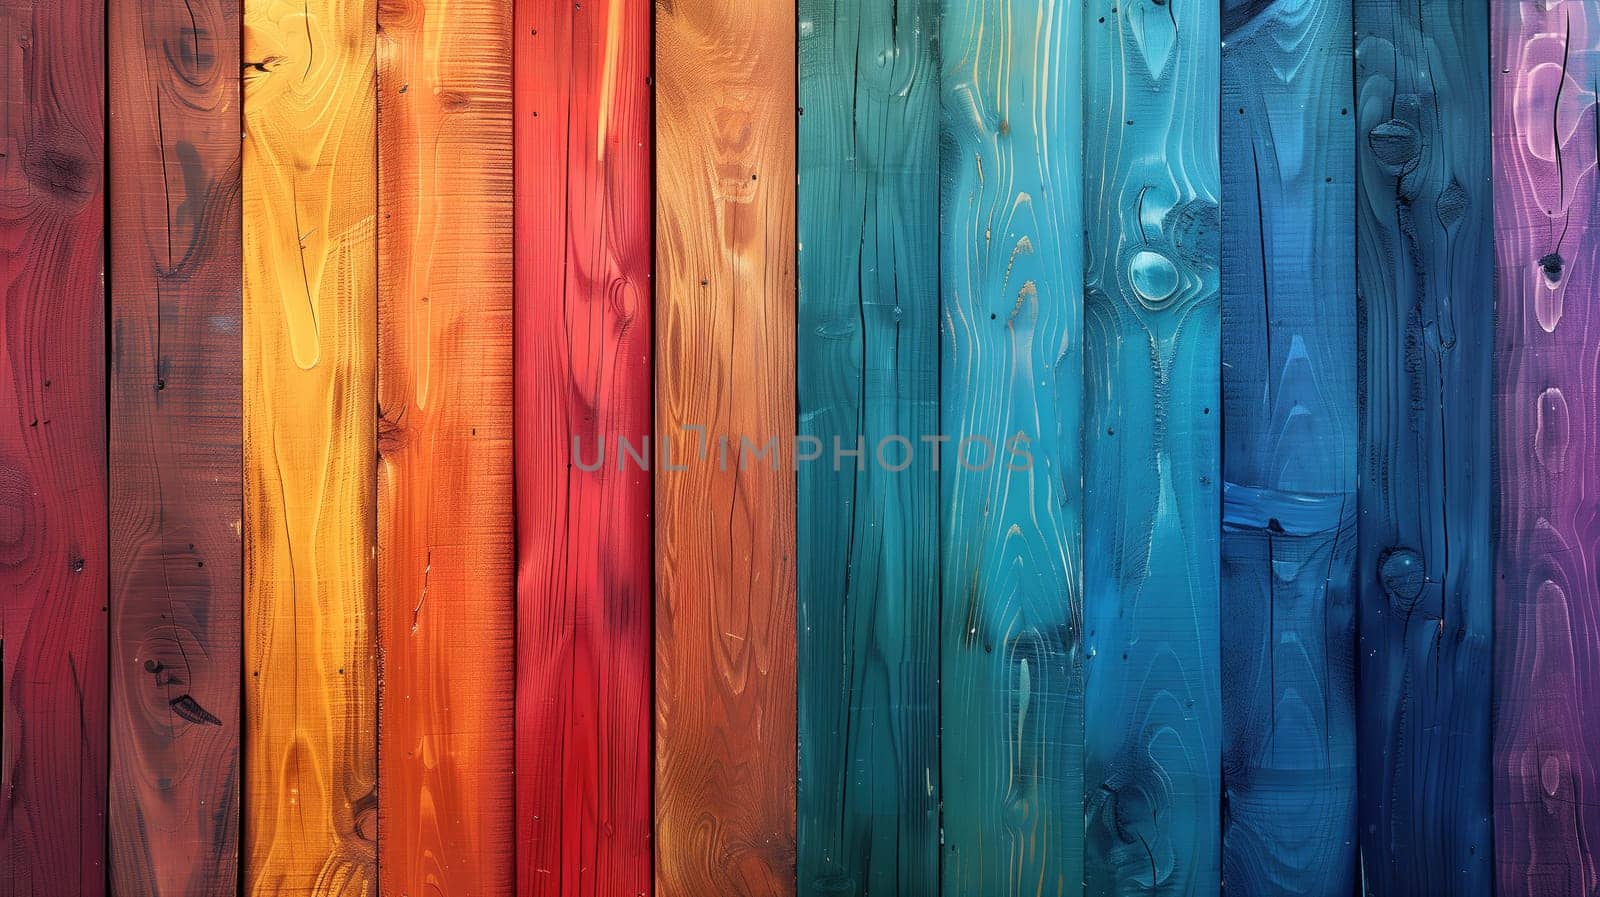 A wooden fence painted in the colors of the rainbow, symbolizing the LGBT pride movement. Each slat of the fence displays a vibrant hue representing diversity and inclusivity.